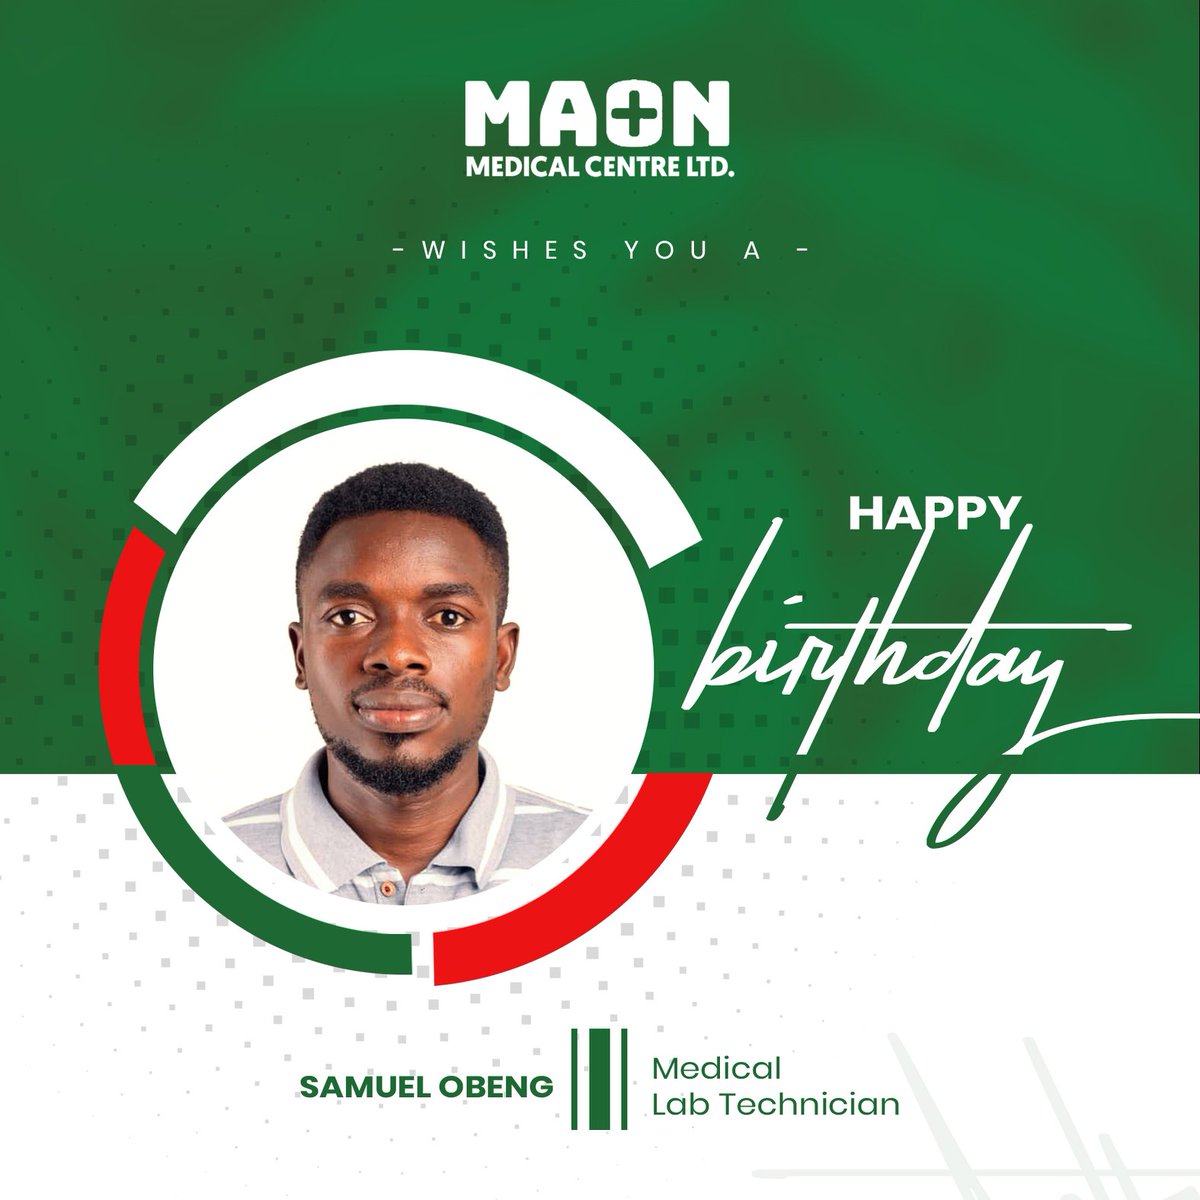 Happy birthday to our dear Medical Lab Technician. We pray that this day marks the beginning of more mazing events in your life #HappyBirthday #BirthdayCelebration #Birthday #BirthdayWishes